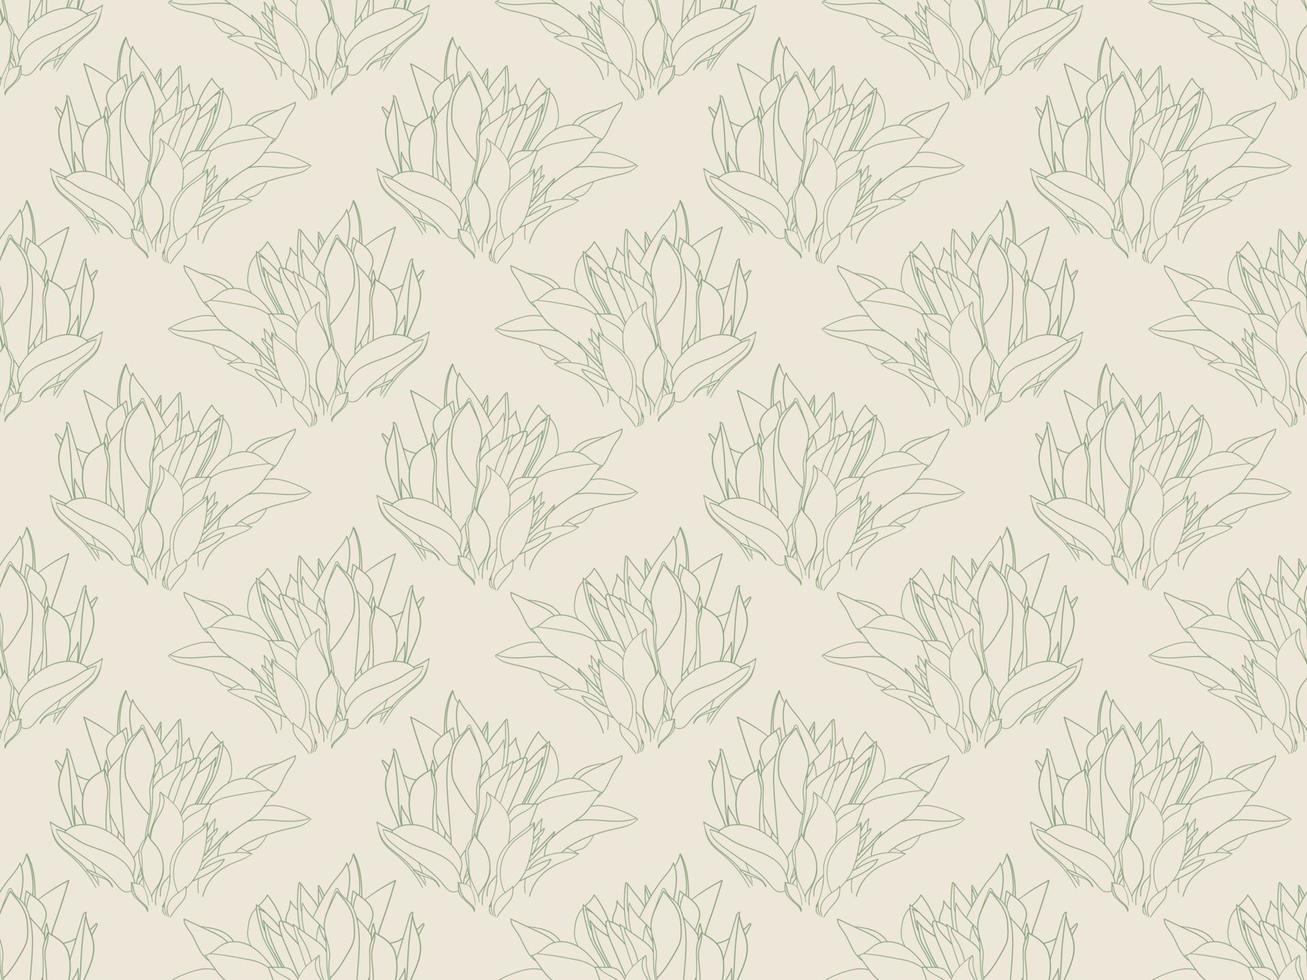 Foliage pattern of leaf plant for textile design. Floral art for wallpaper or fabric fashion. vector